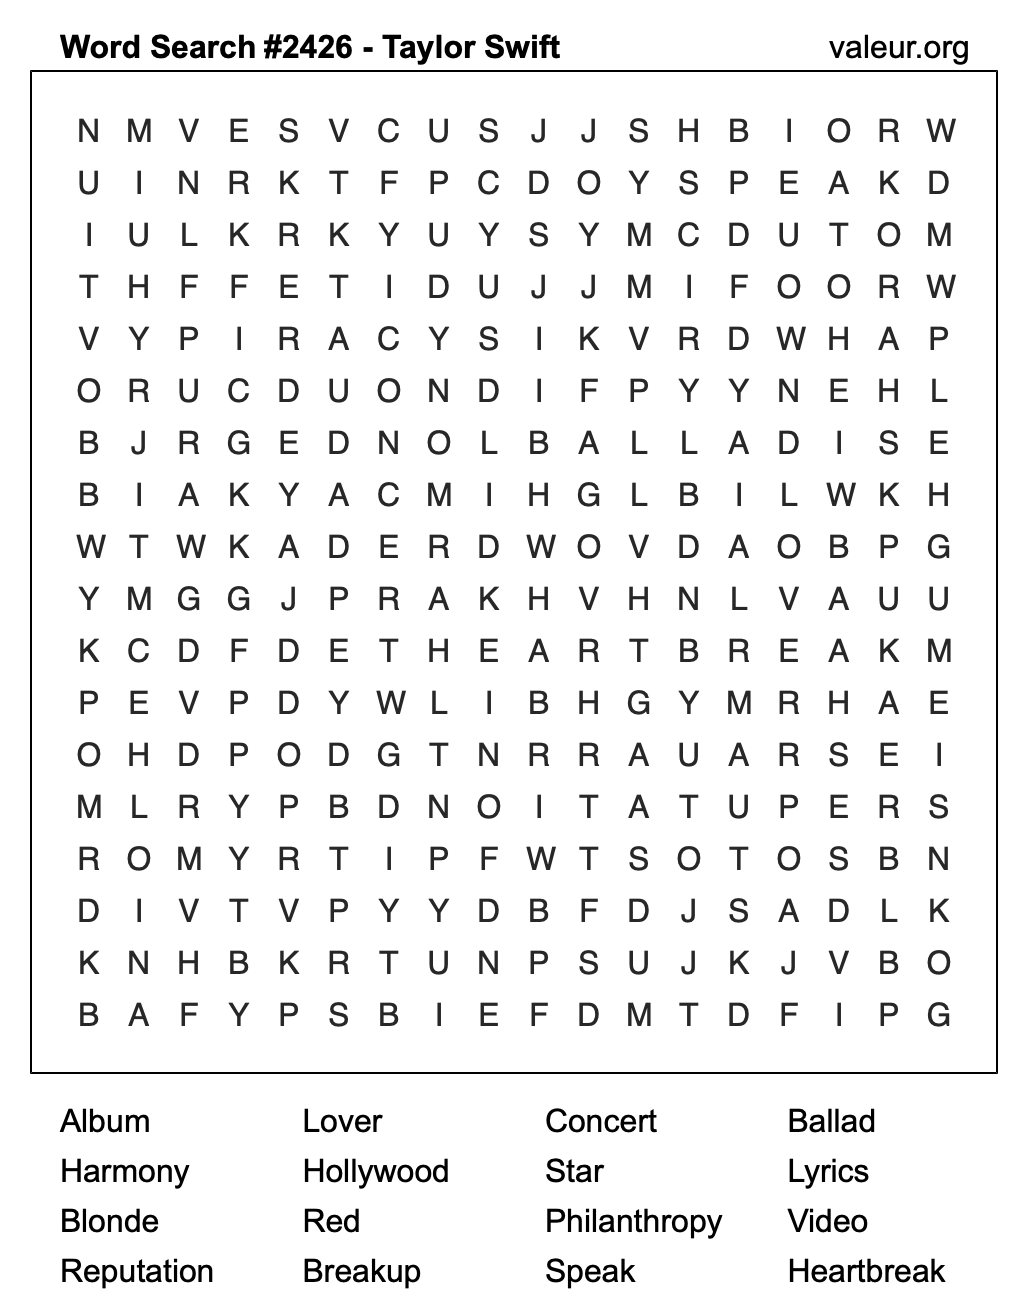 Taylor Swift Word Search Puzzle #2426